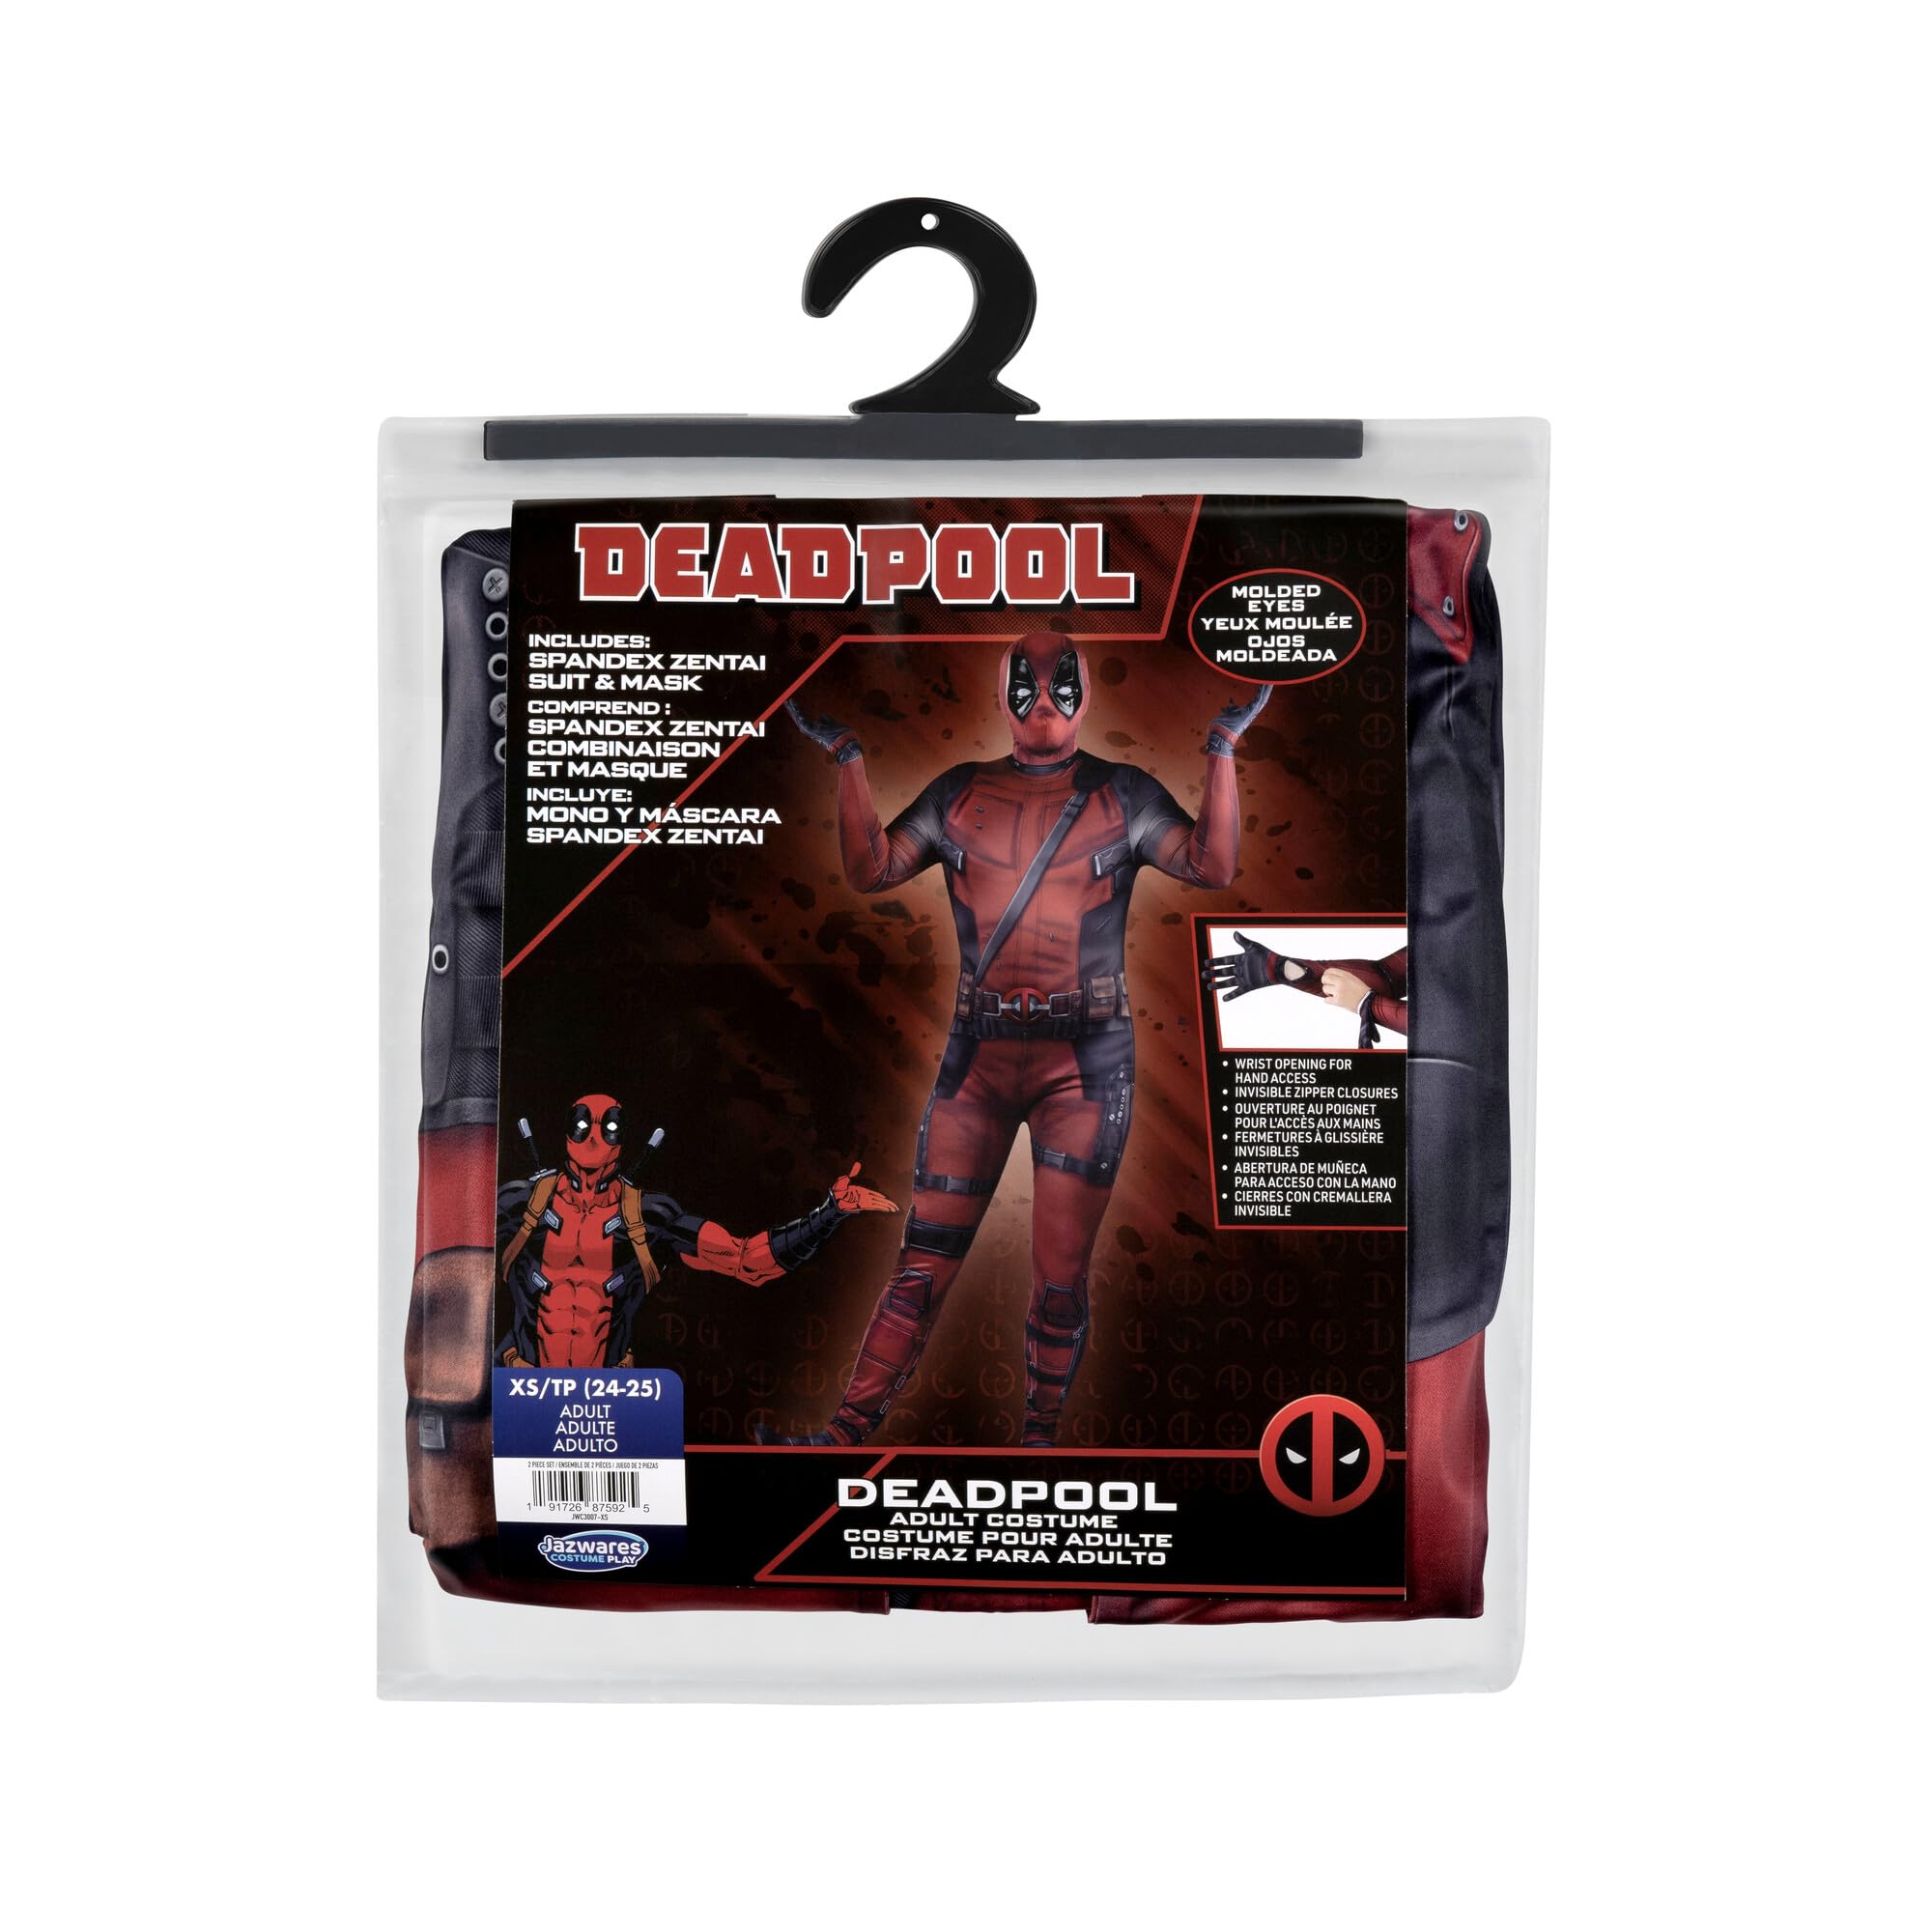 Marvel Deadpool Official Adult Deluxe Zentai Costume - Deluxe Two-Way Stretch Spandex with Invisible Zippers and Wrist Openings for Added Convenience - Medium